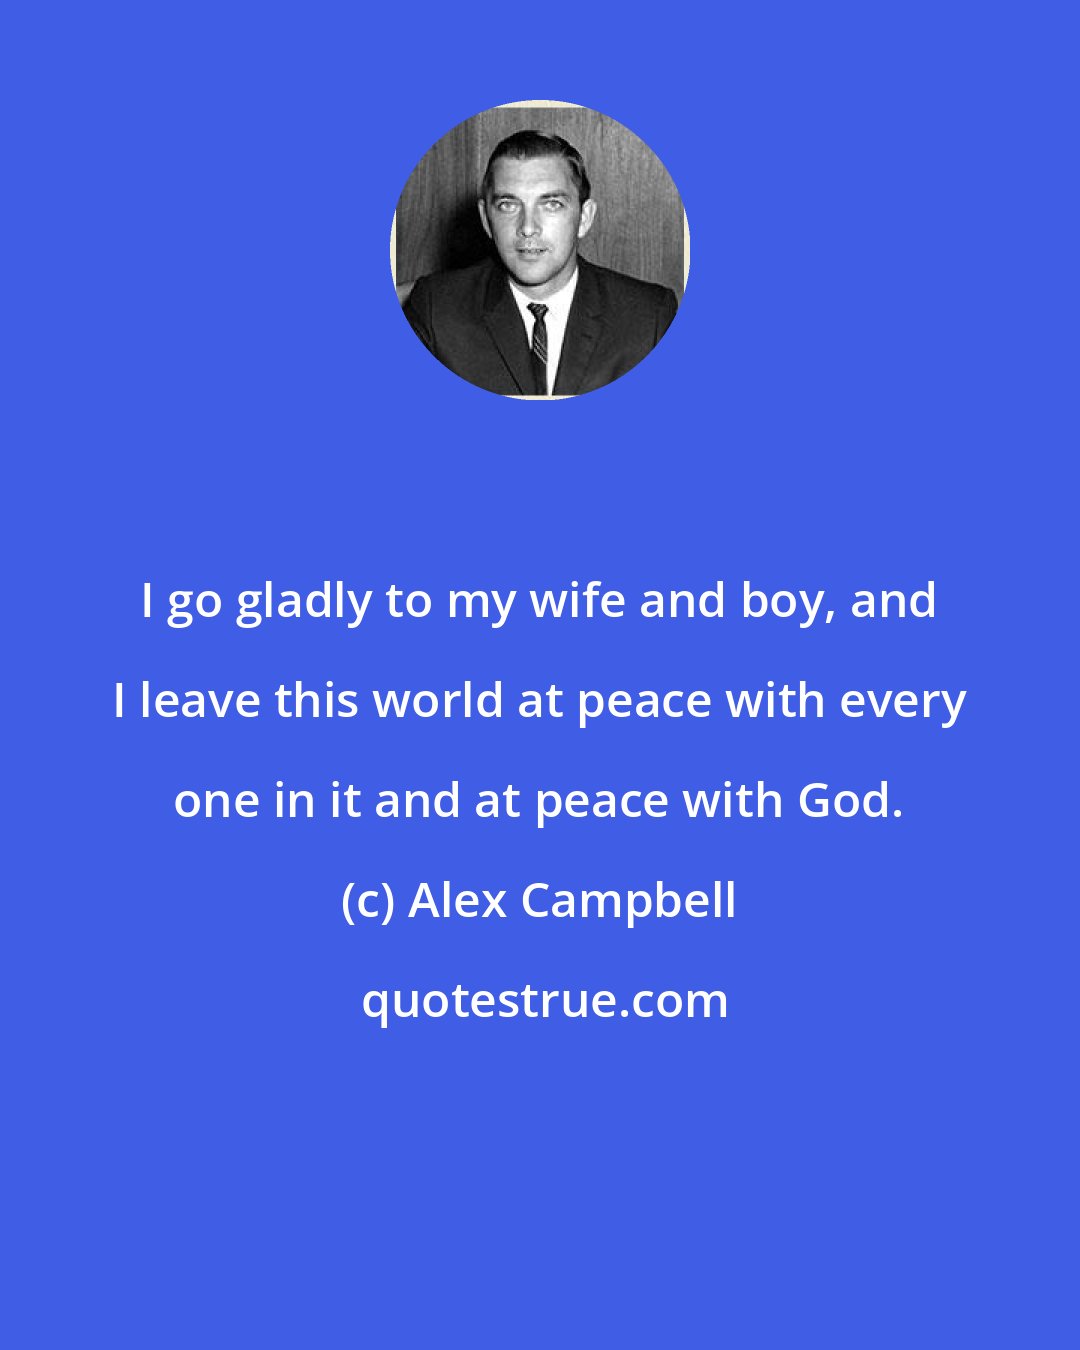 Alex Campbell: I go gladly to my wife and boy, and I leave this world at peace with every one in it and at peace with God.